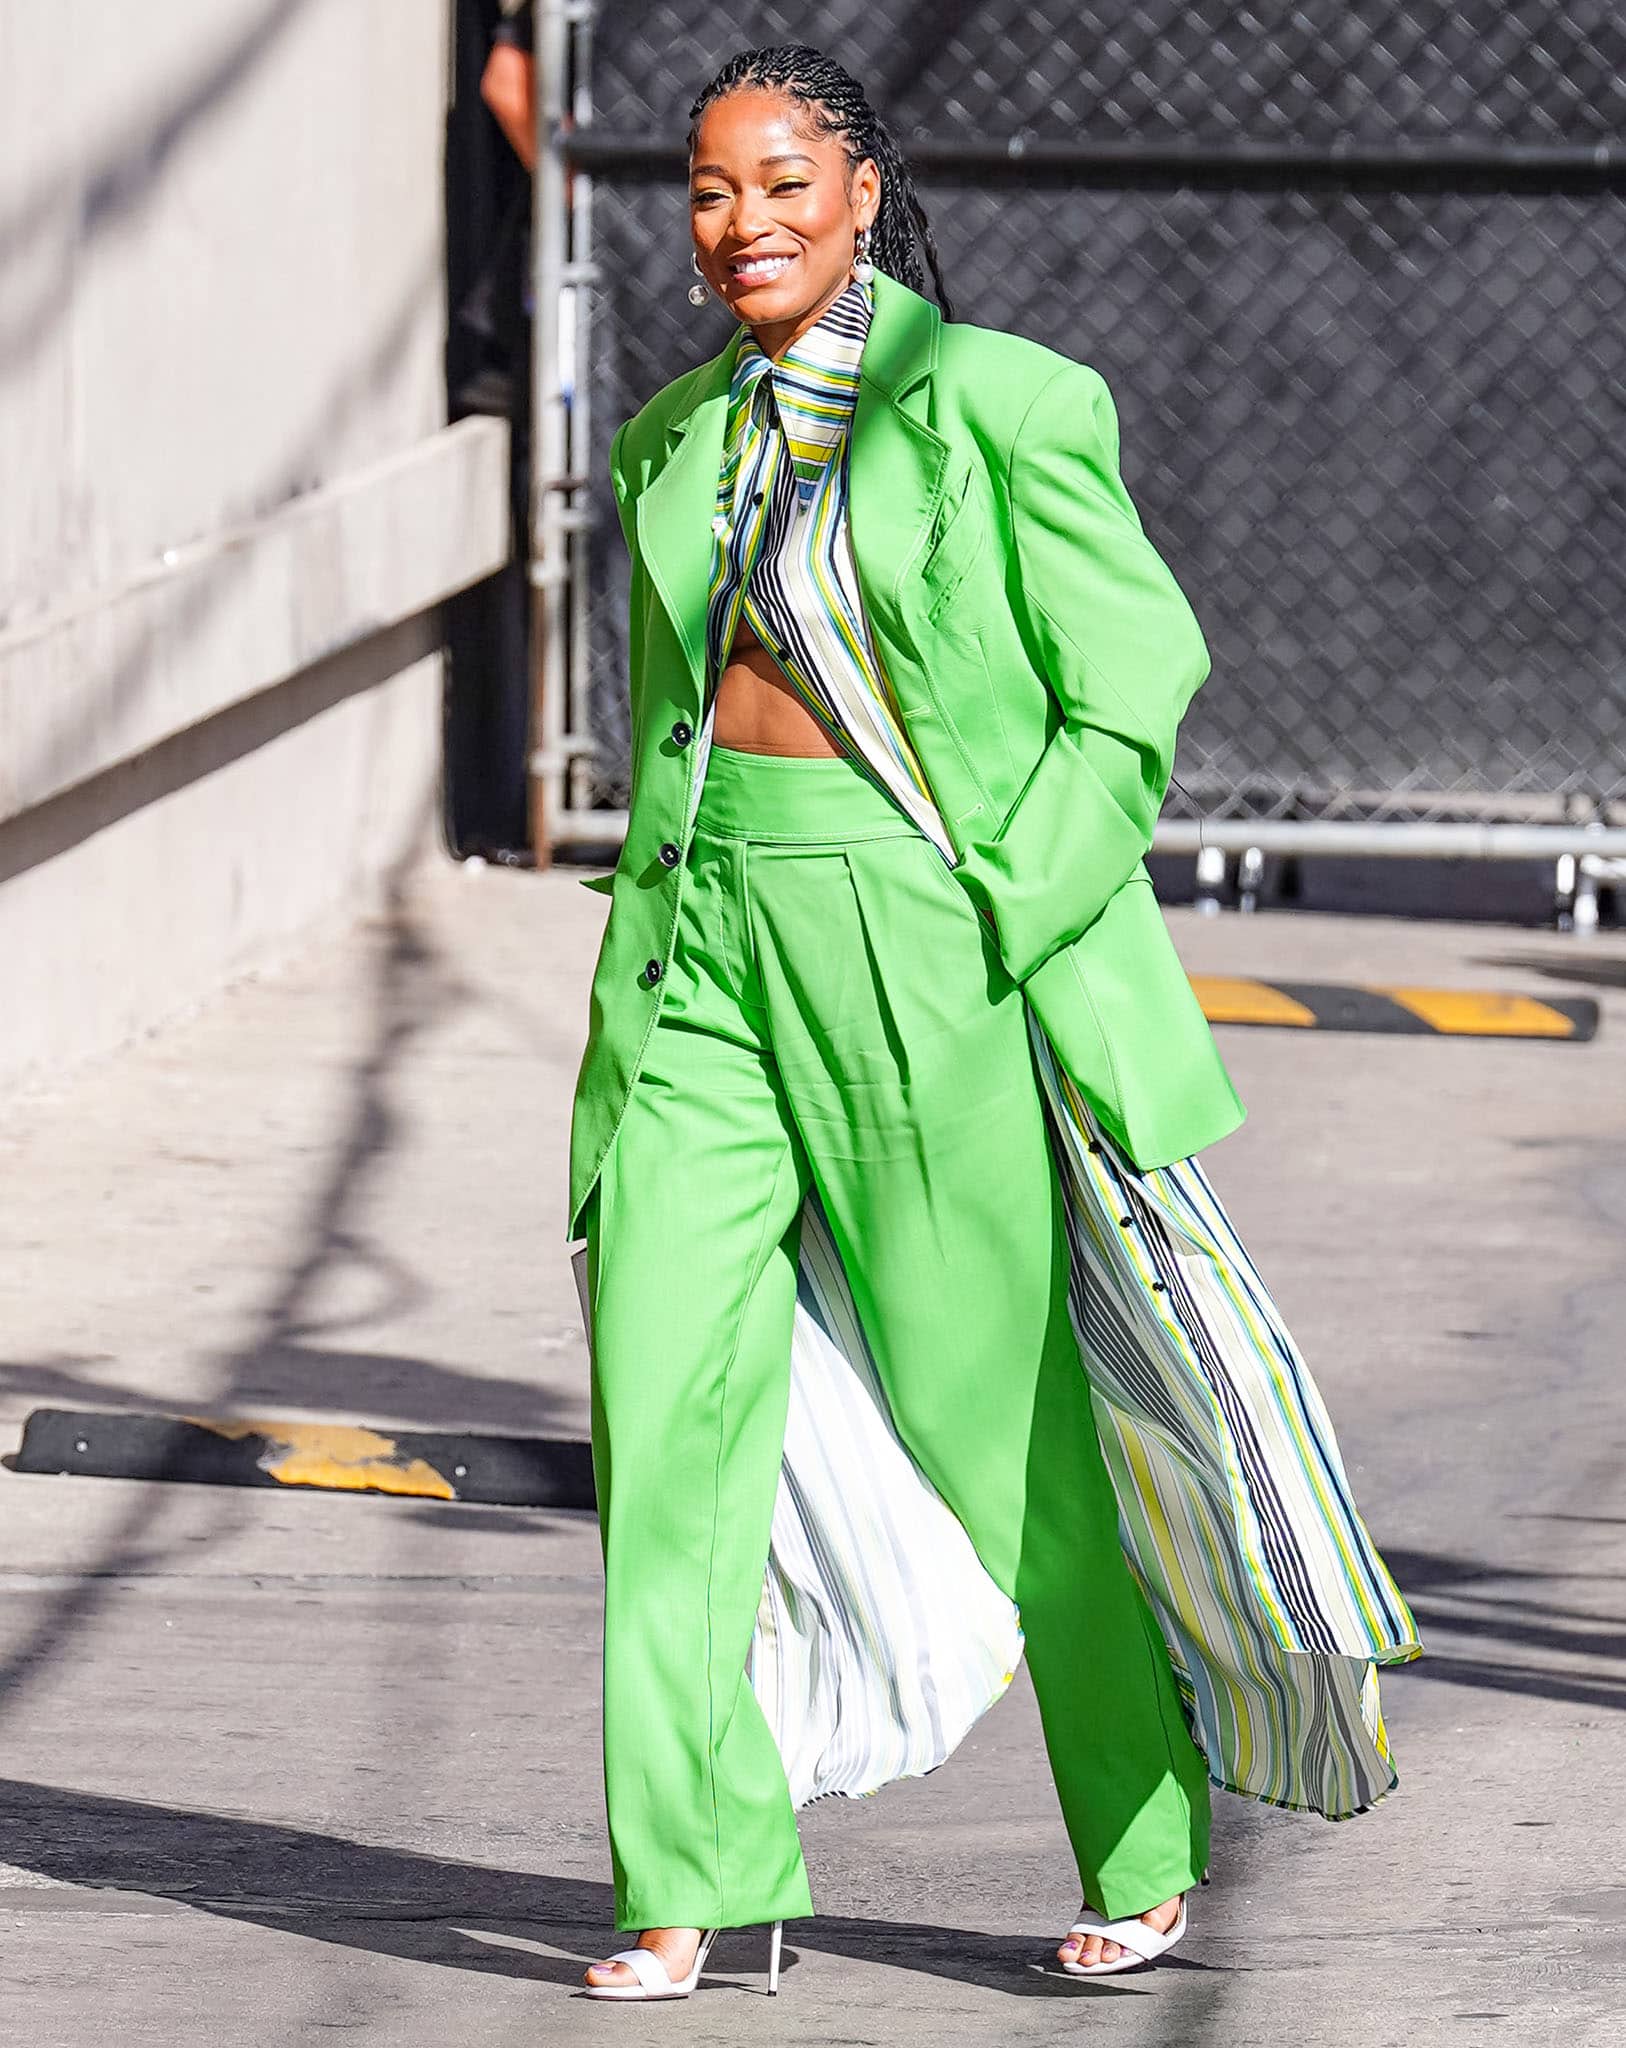 Keke Palmer can't be missed in a lime green Christopher John Rogers Resort 2022 suit for her Jimmy Kimmel Live! appearance on March 16, 2022